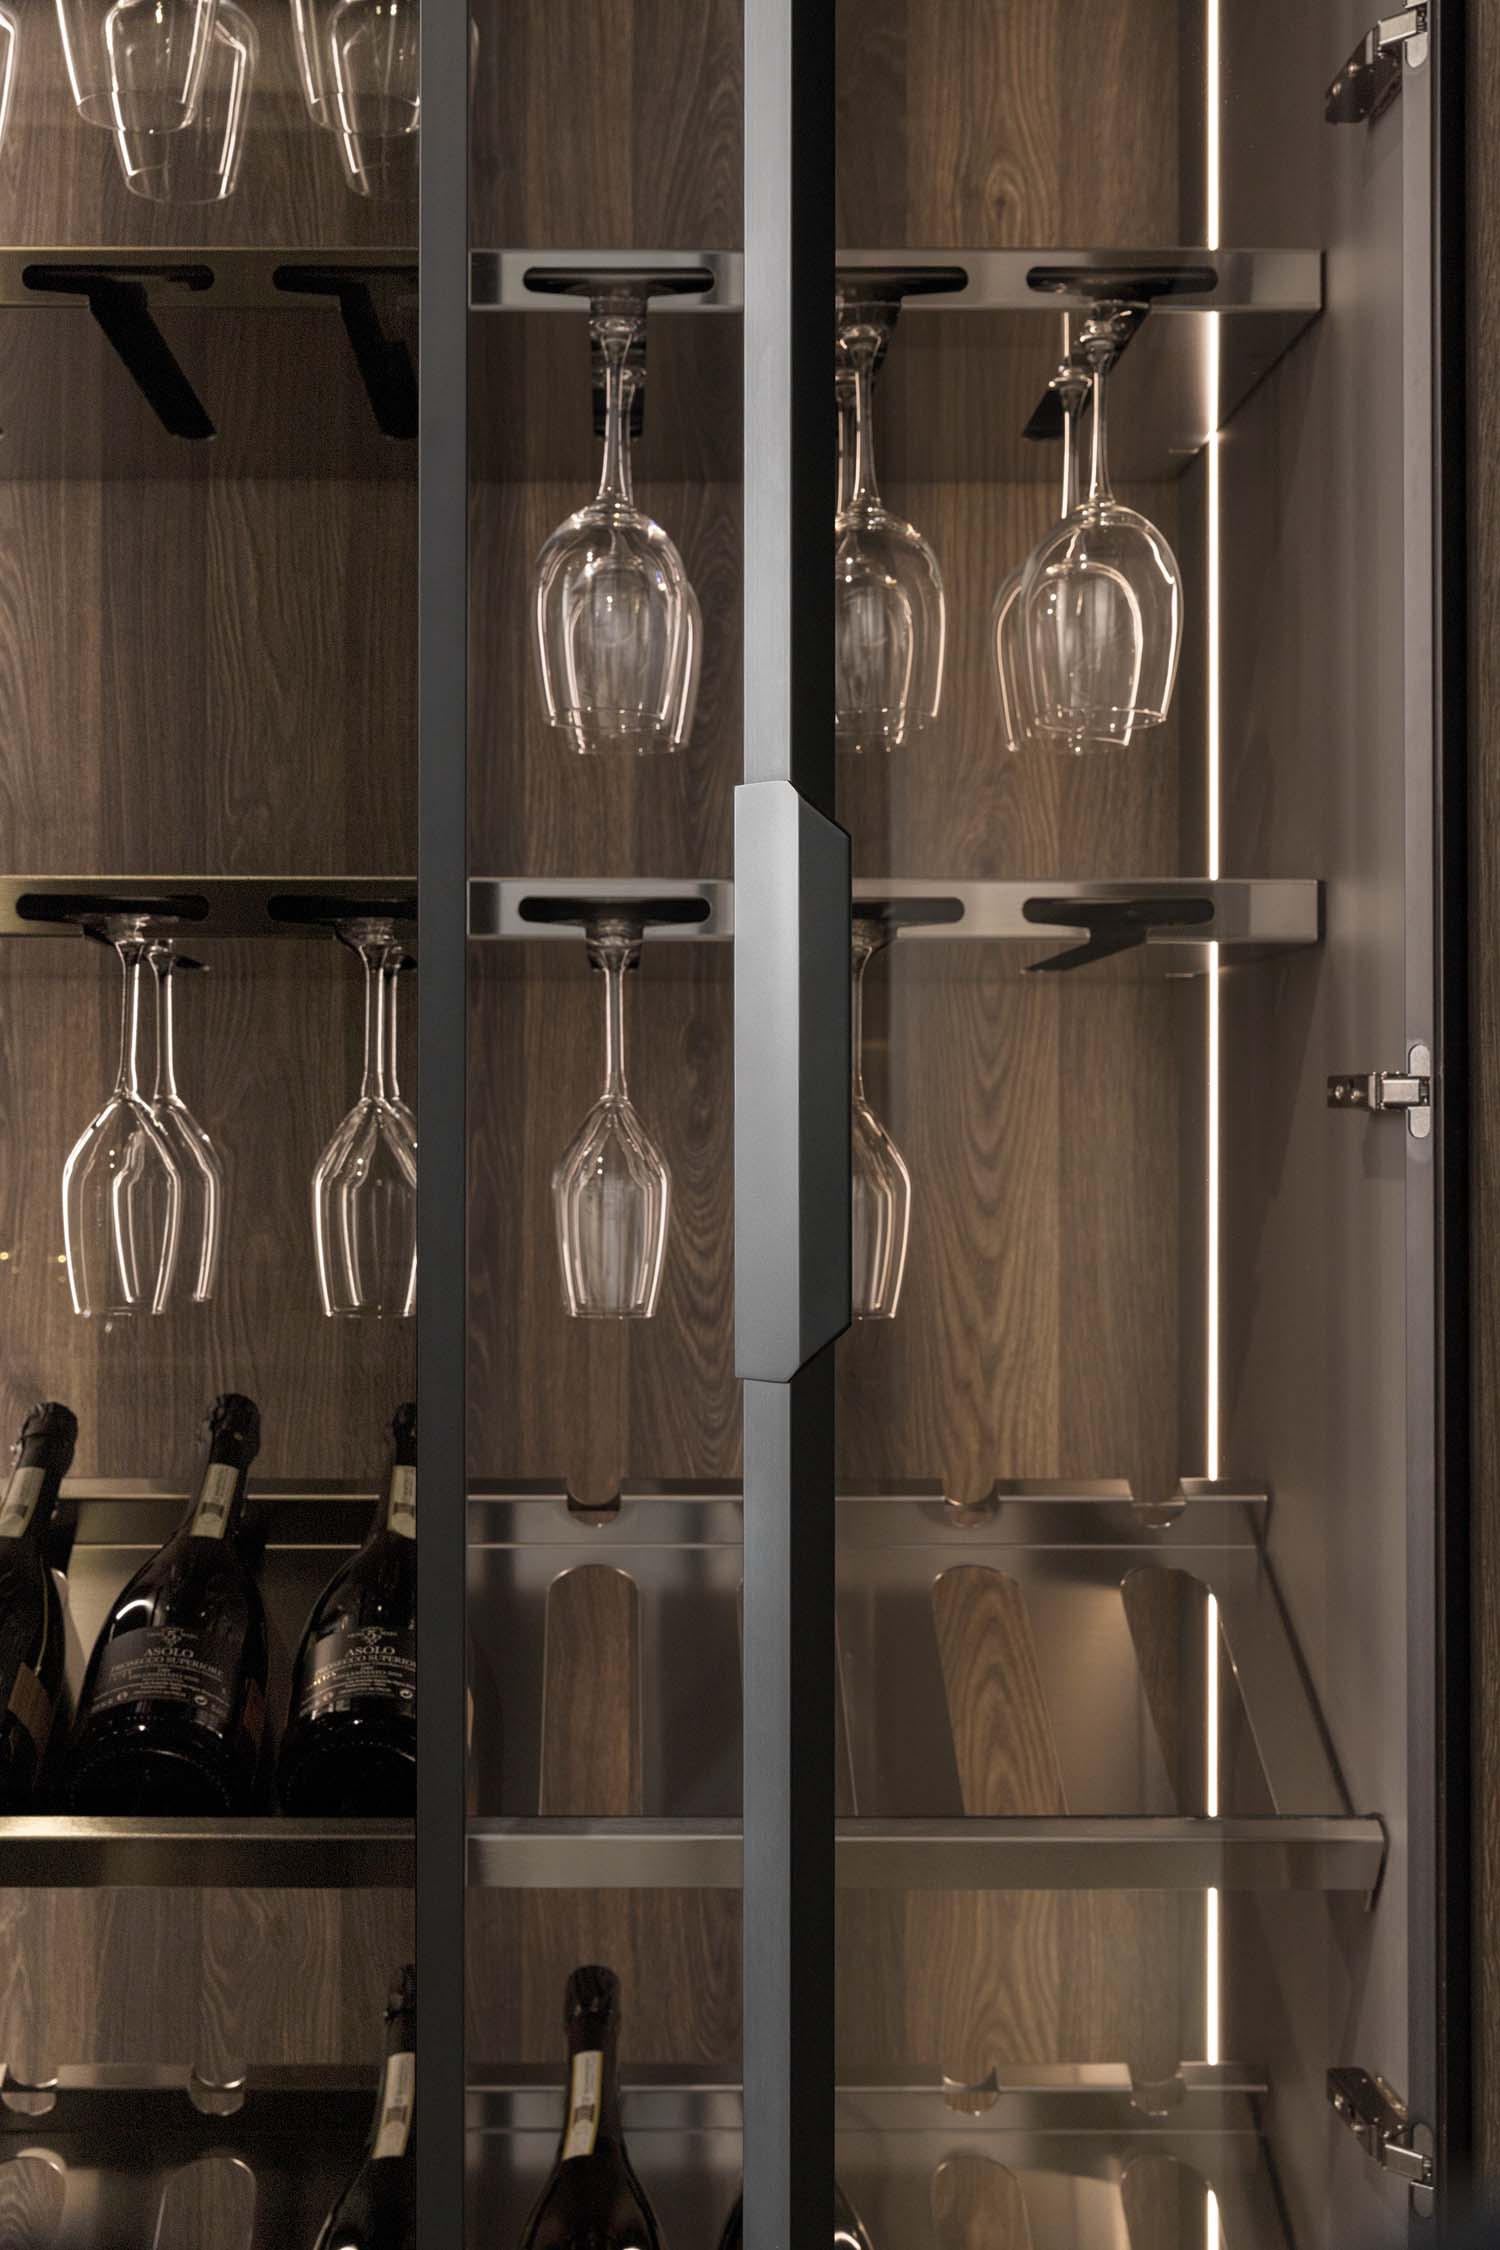 Luxury black-lit LED glass tall units finished with a complimentary oak veneer back panel and black aluminium frame surrounding elegant smoked glass. The perfect location for glassware and wine.